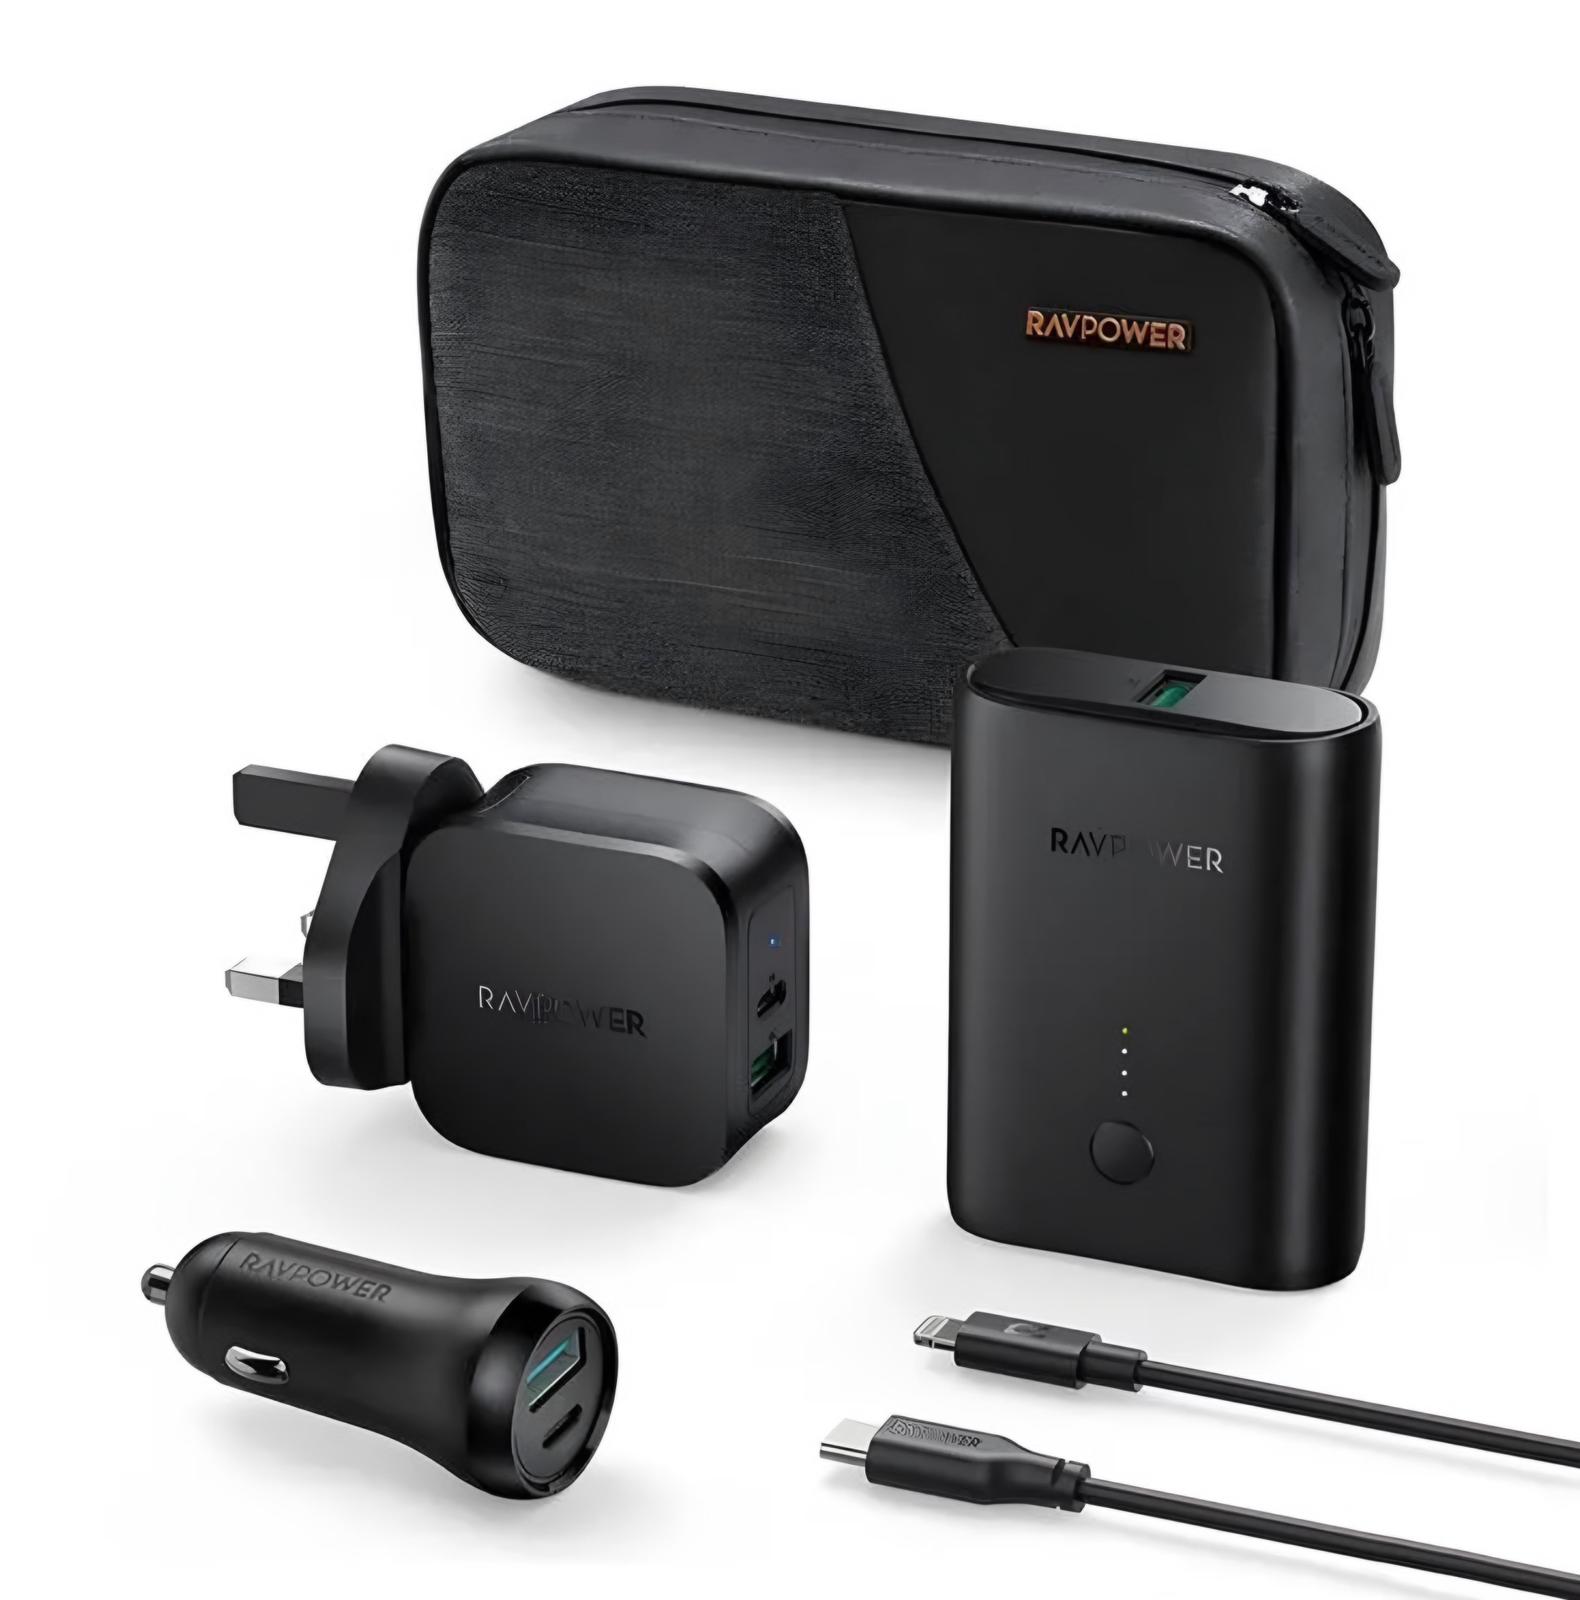  Travel package from RavPower: 20,000 mAh 5-in-1